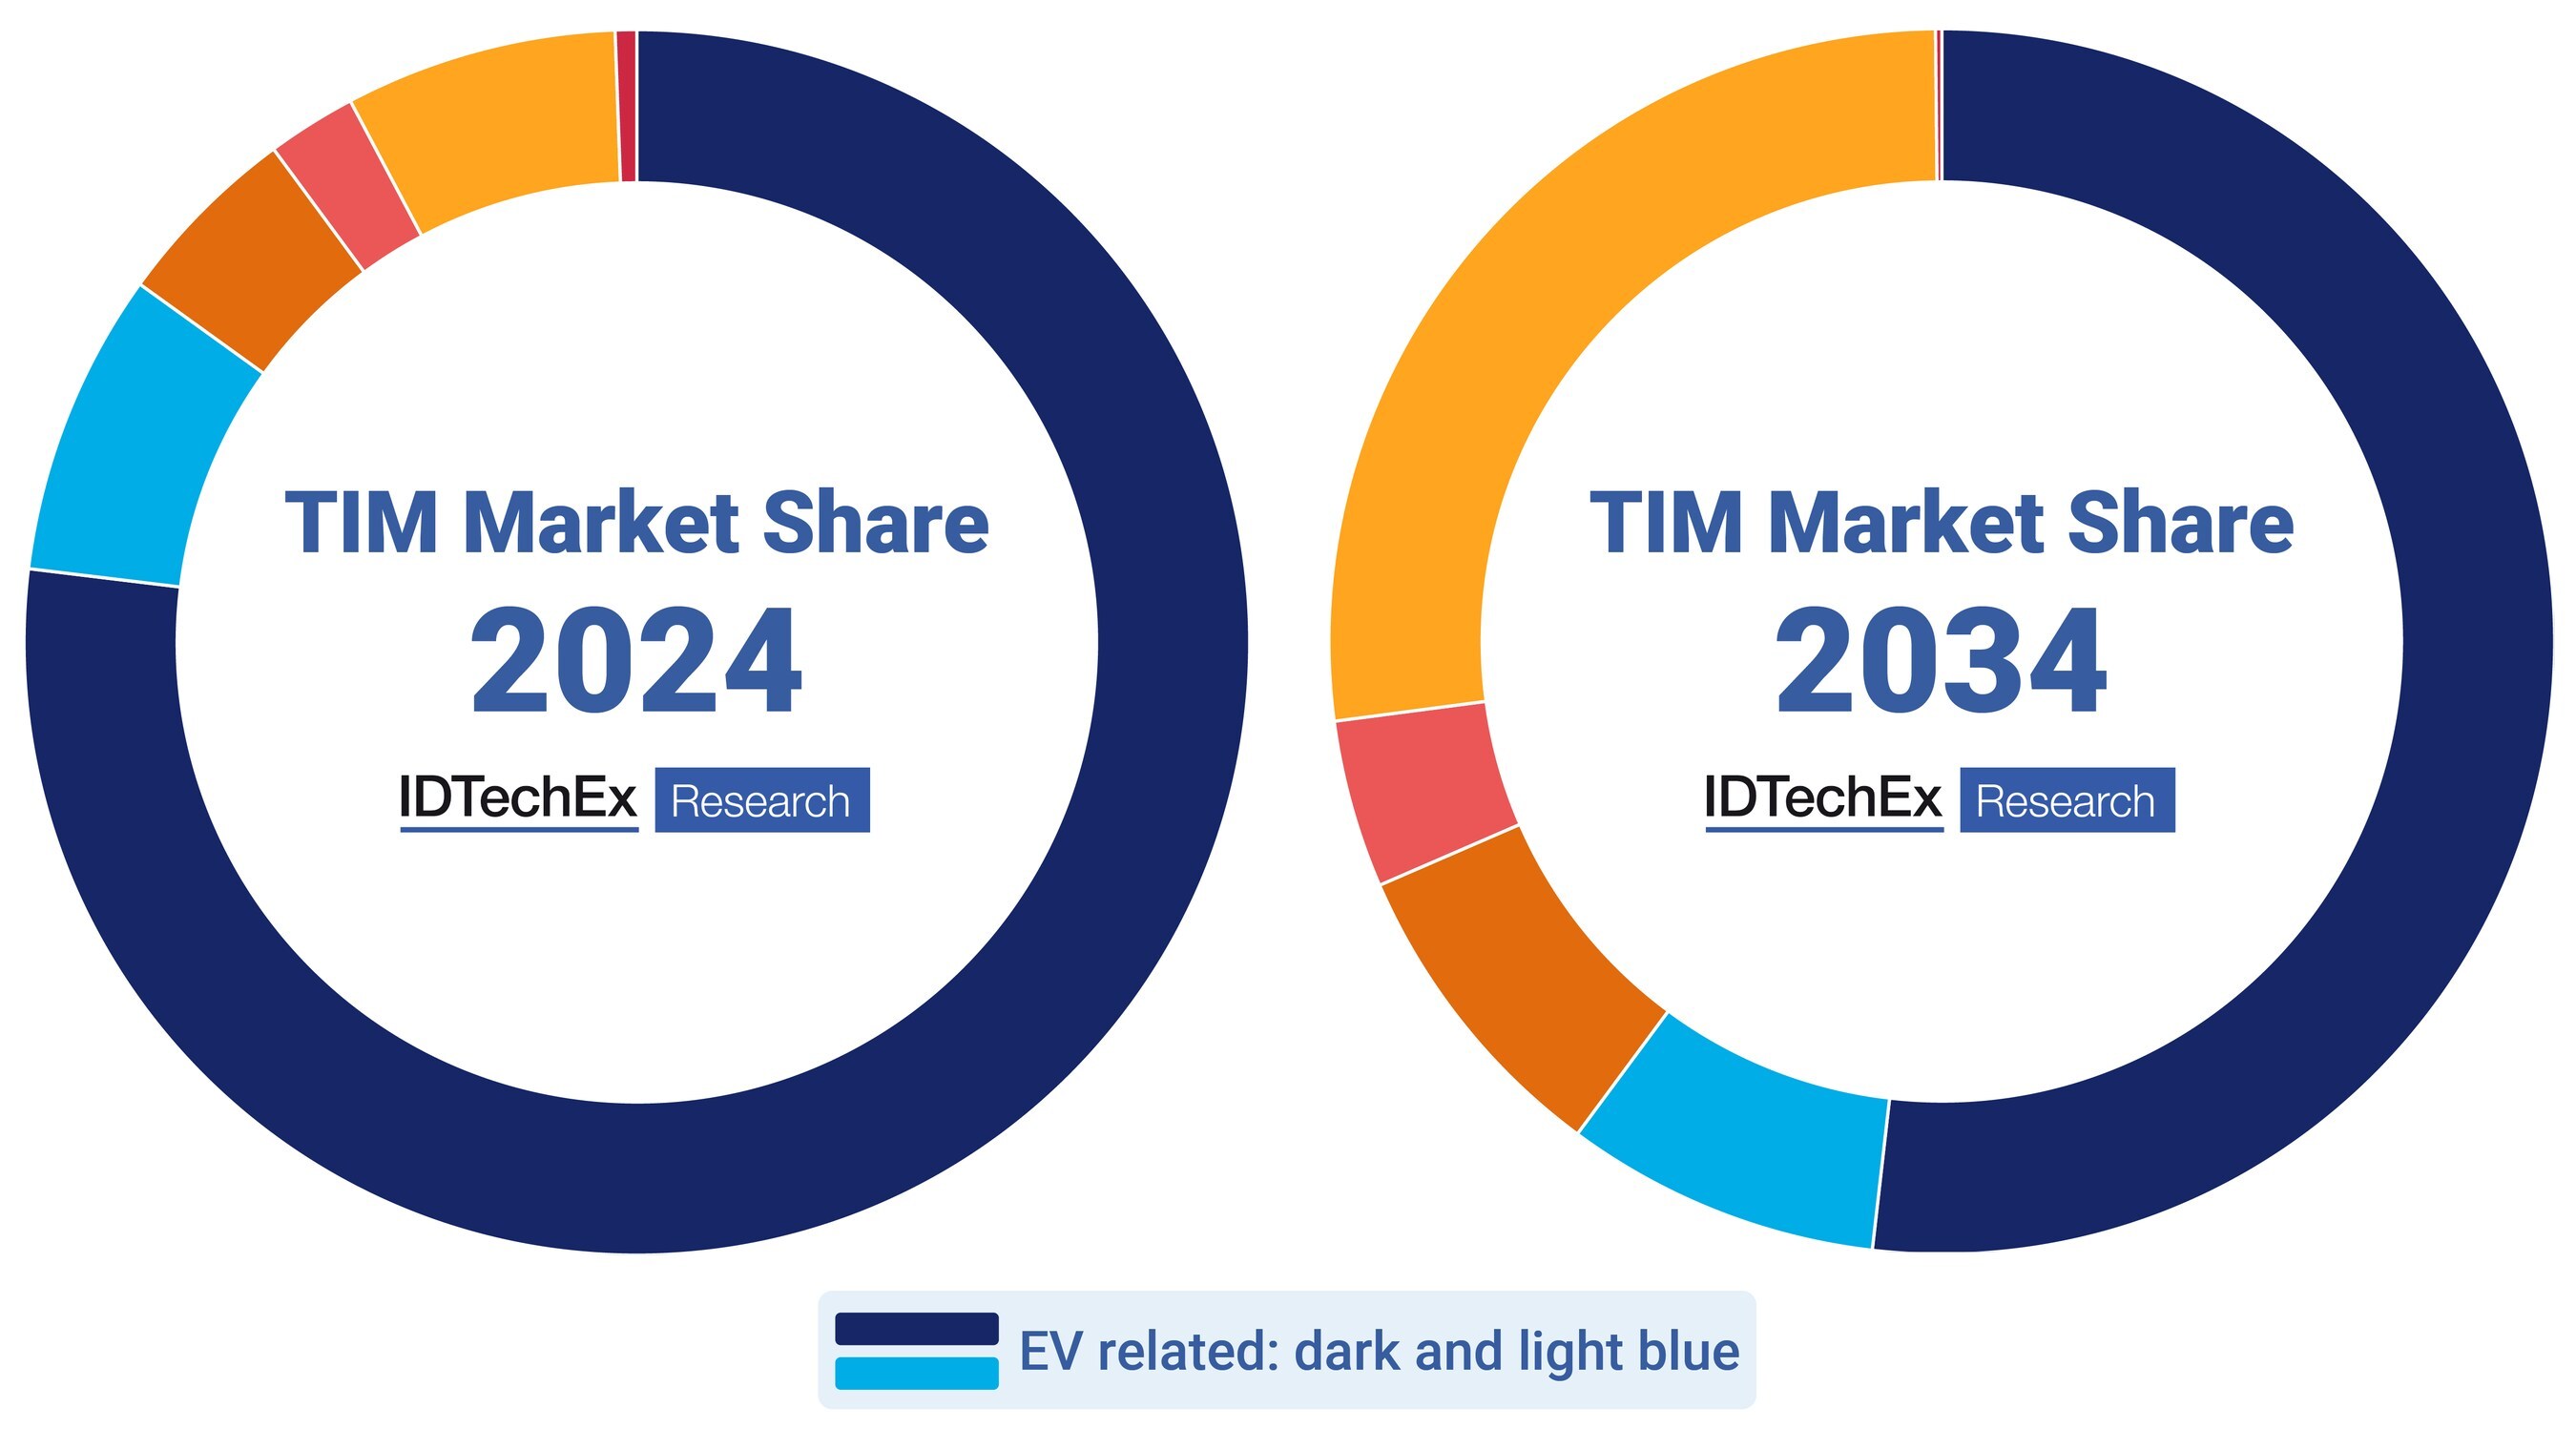 Emerging industries require TIMs and will impact the landscape of demand. EV remains the largest target application for TIMs but the other applications are growing very fast. Source: IDTechEx report “Thermal Interface Materials 2024-2034